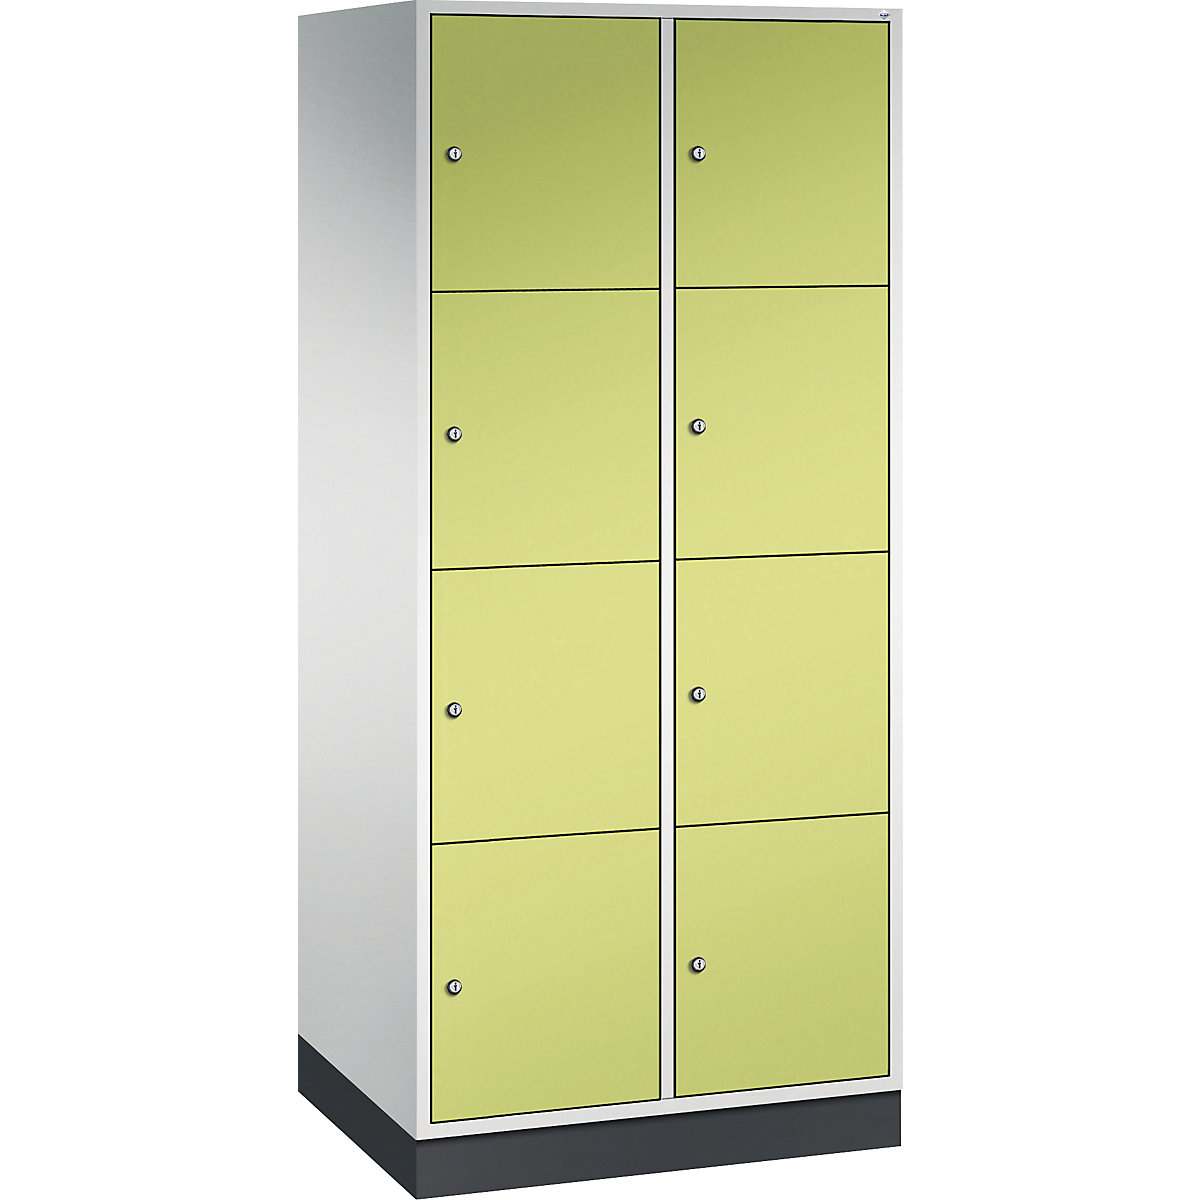 INTRO steel compartment locker, compartment height 435 mm – C+P, WxD 820 x 600 mm, 8 compartments, light grey body, viridian green doors